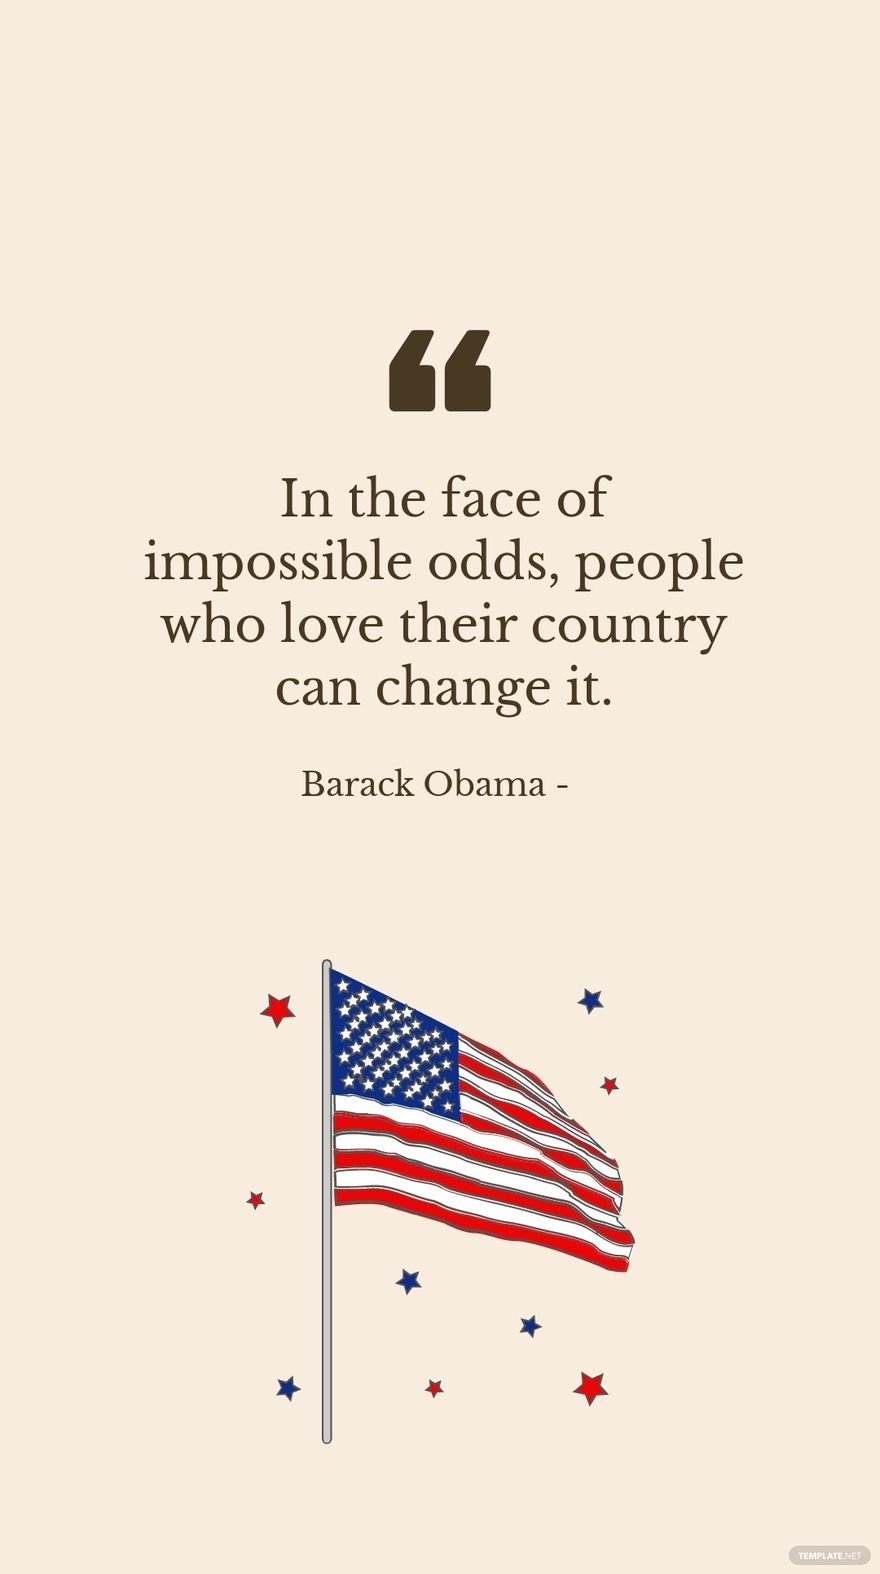 Free Barack Obama - In the face of impossible odds, people who love their country can change it. in JPG